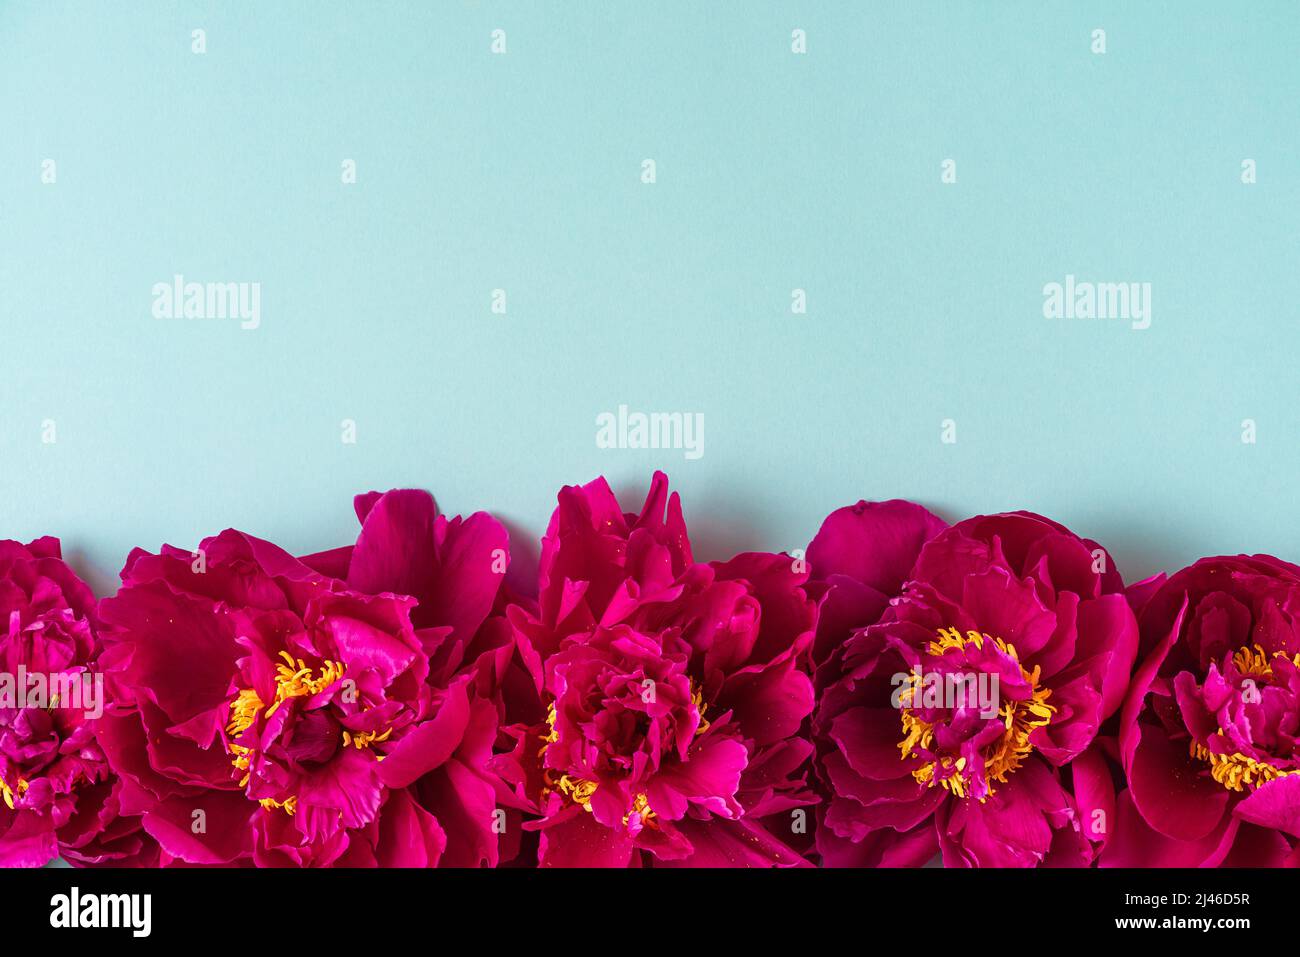 Flowers composition. Border made of pink peony flowers on blue background. Flat lay. top view with copy space Stock Photo